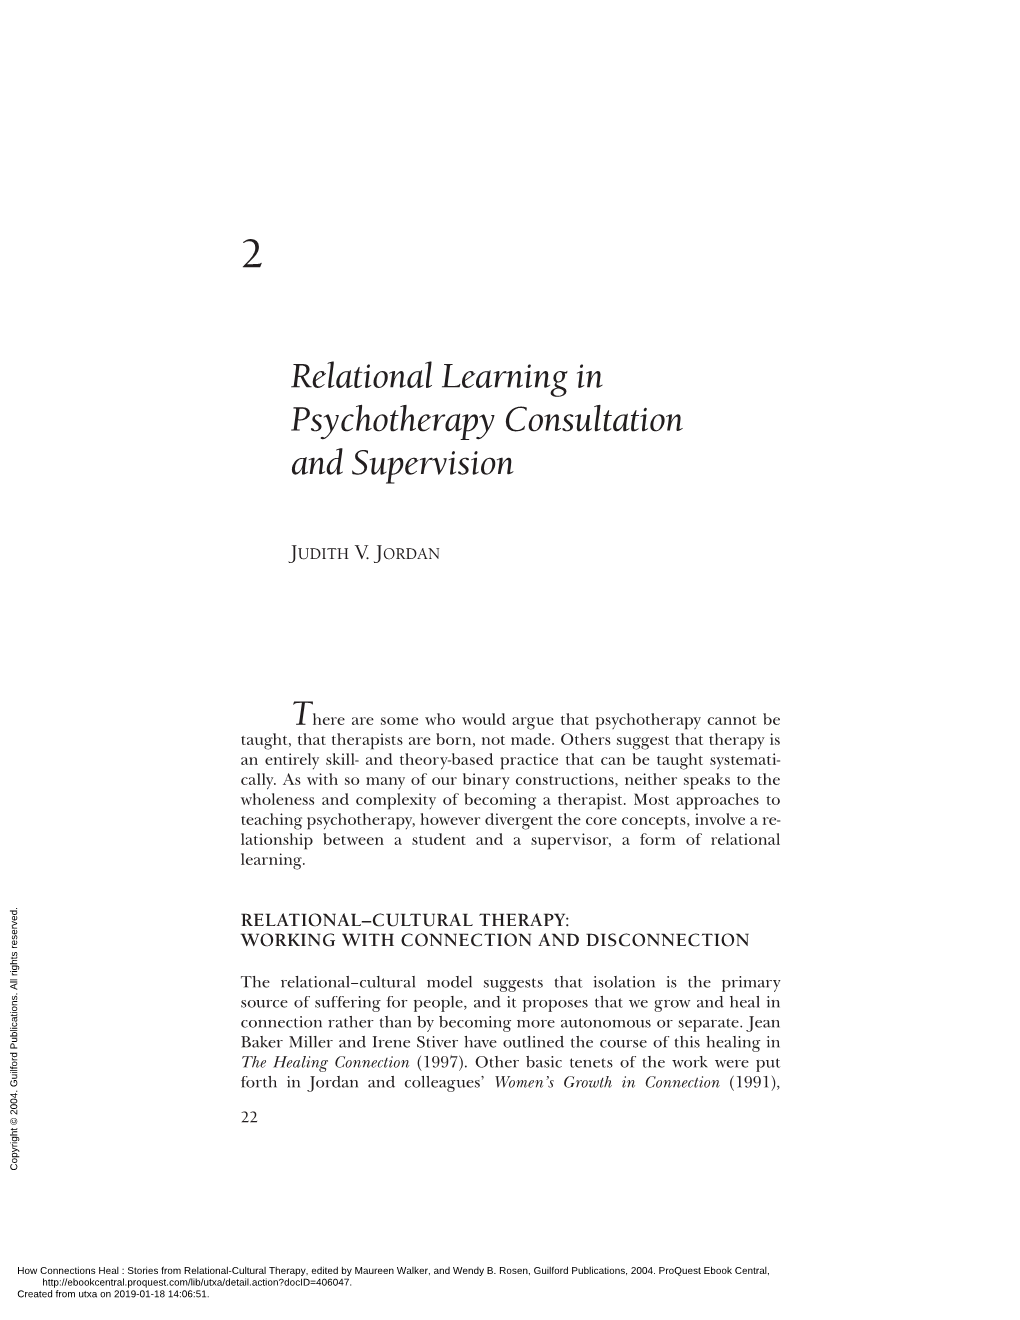 Relational Learning in Psychotherapy Consultation and Supervision